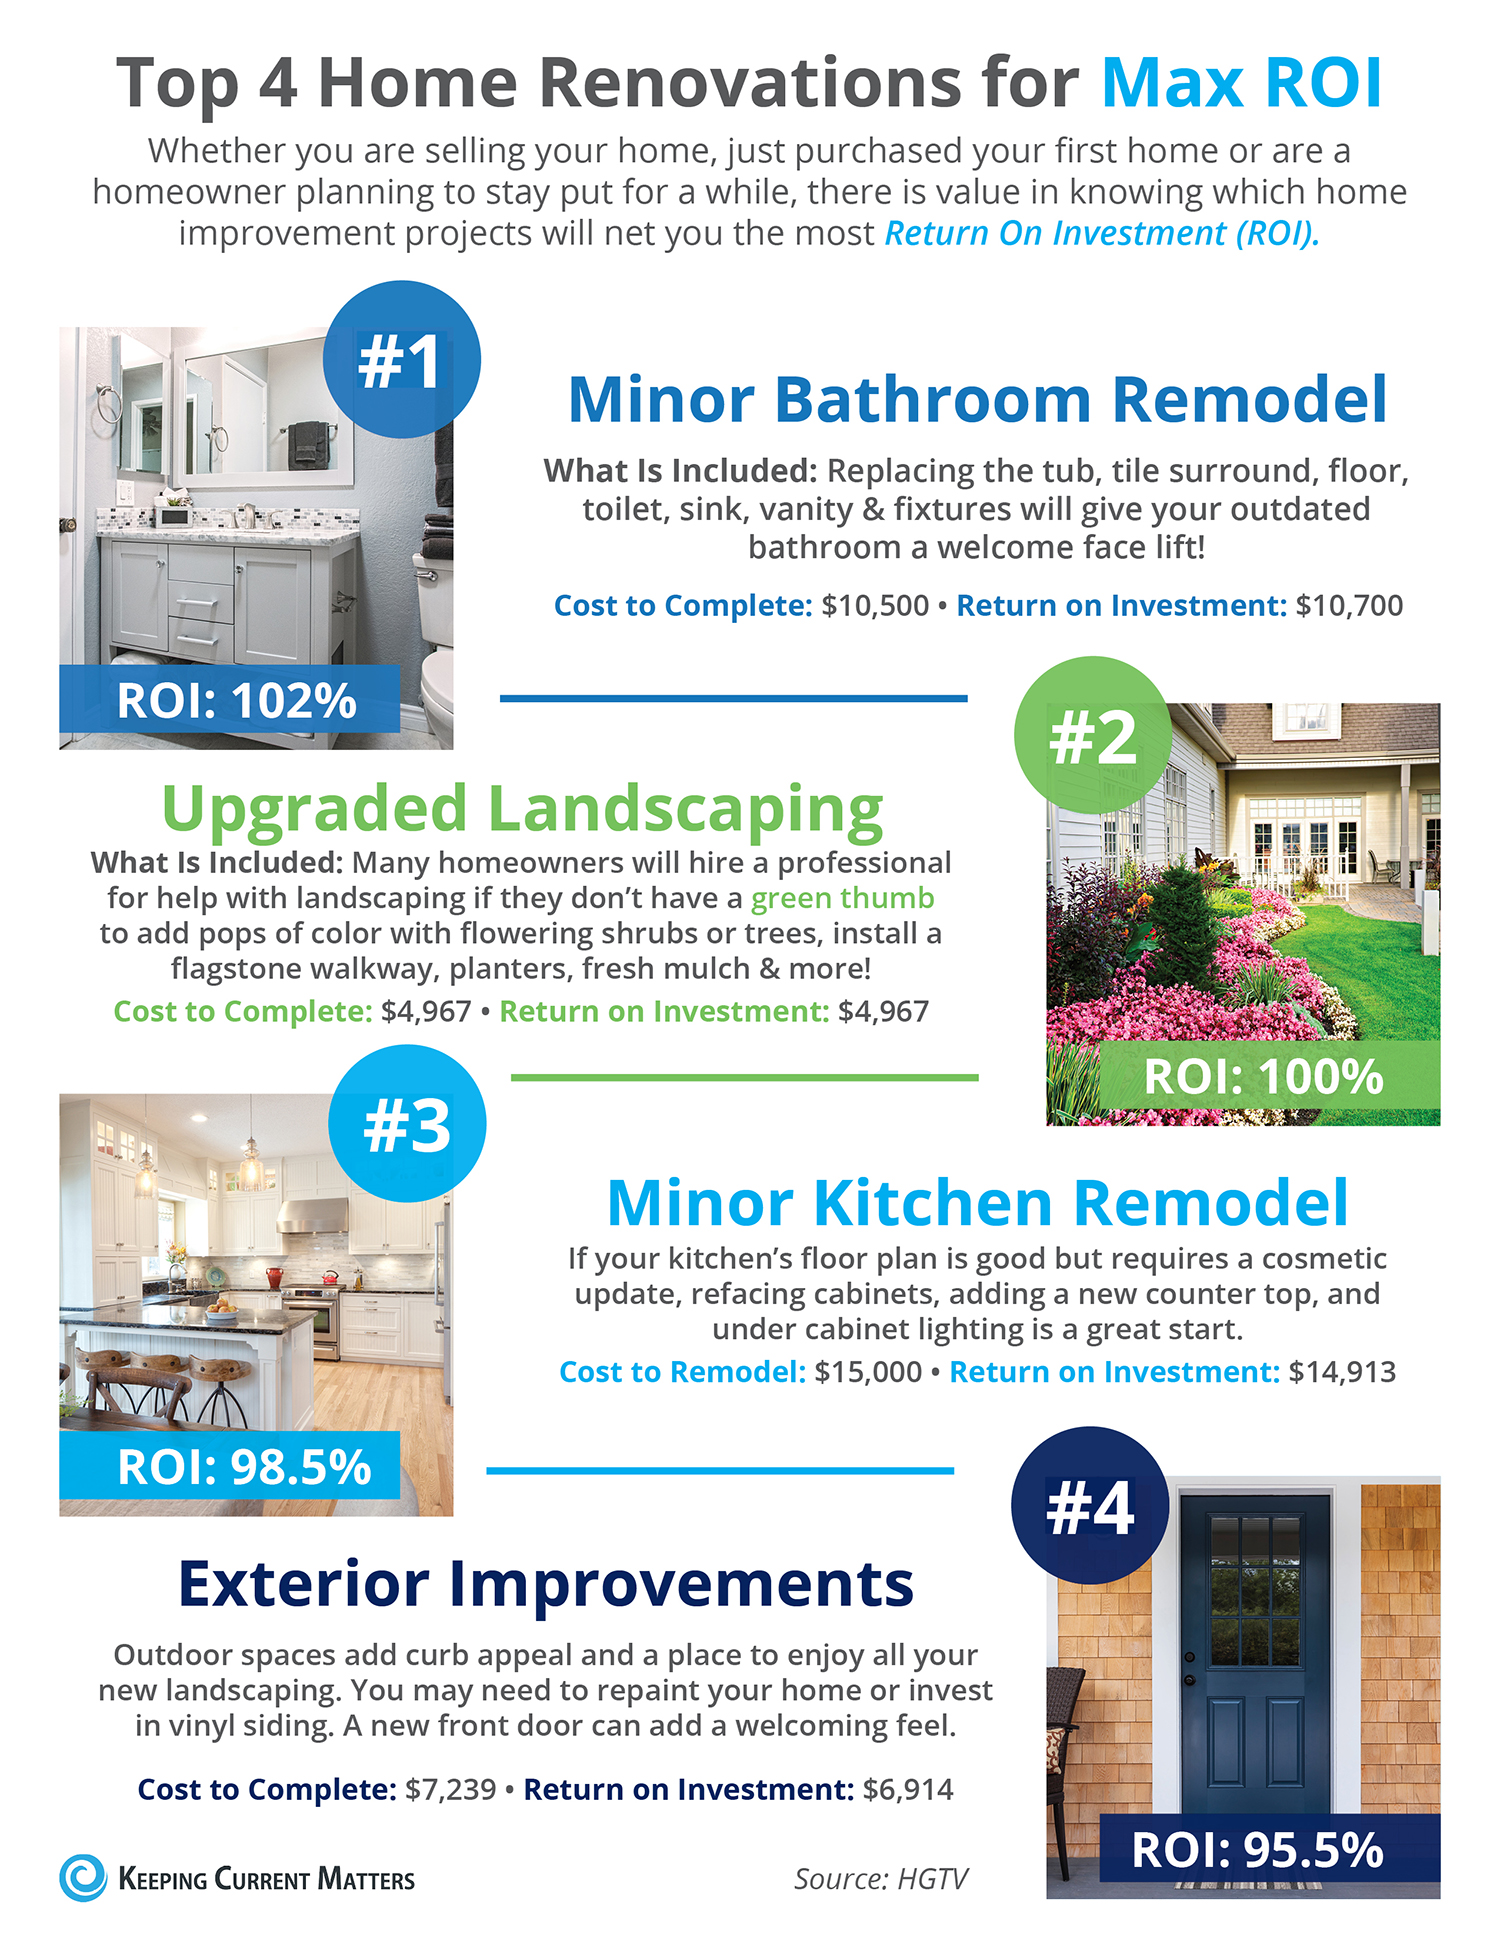 The top 4 home renovations you can do for maximum return on investment.